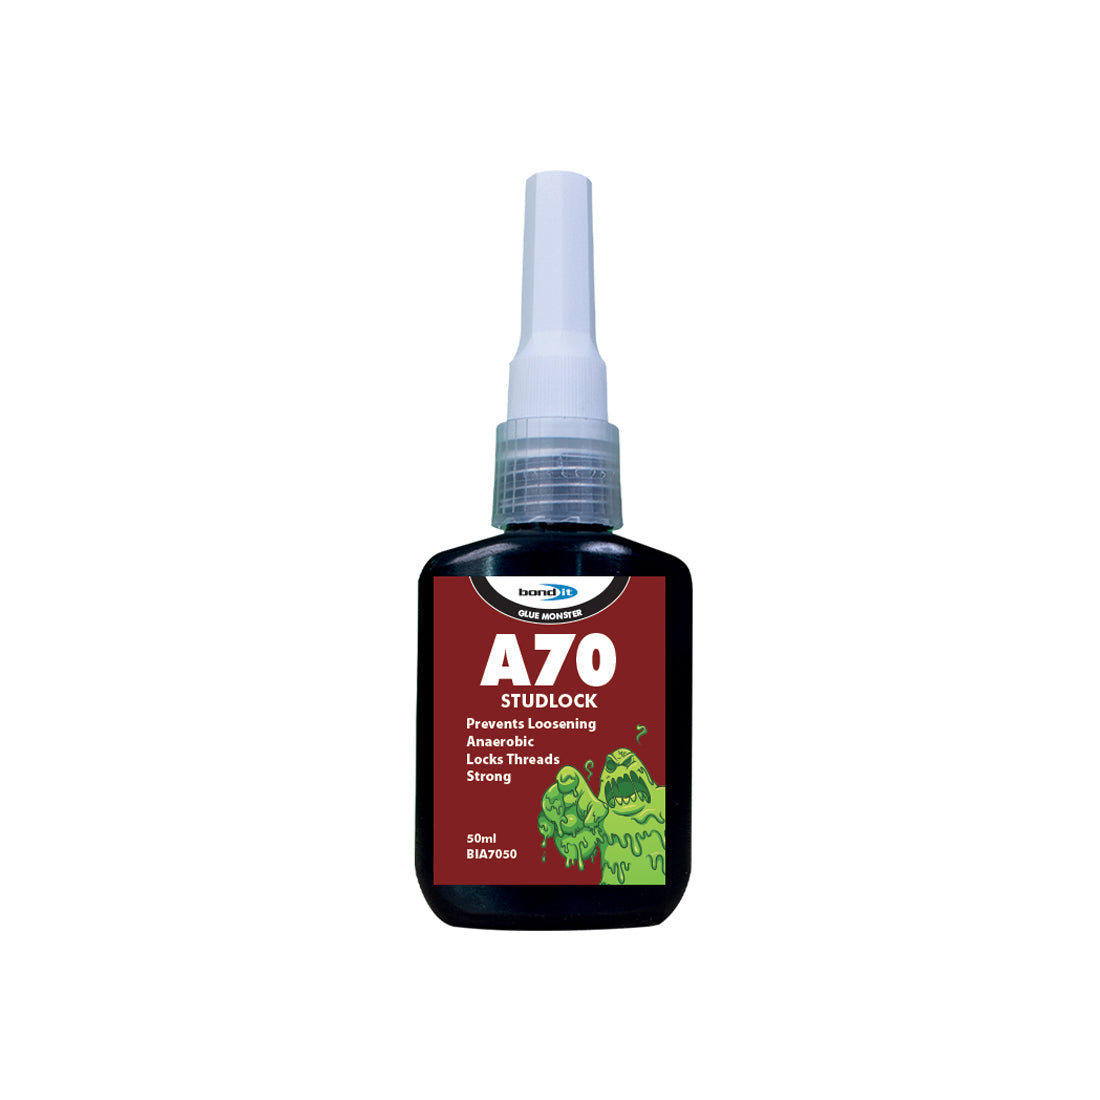 A70 Studlock. Red. Size 50ml.